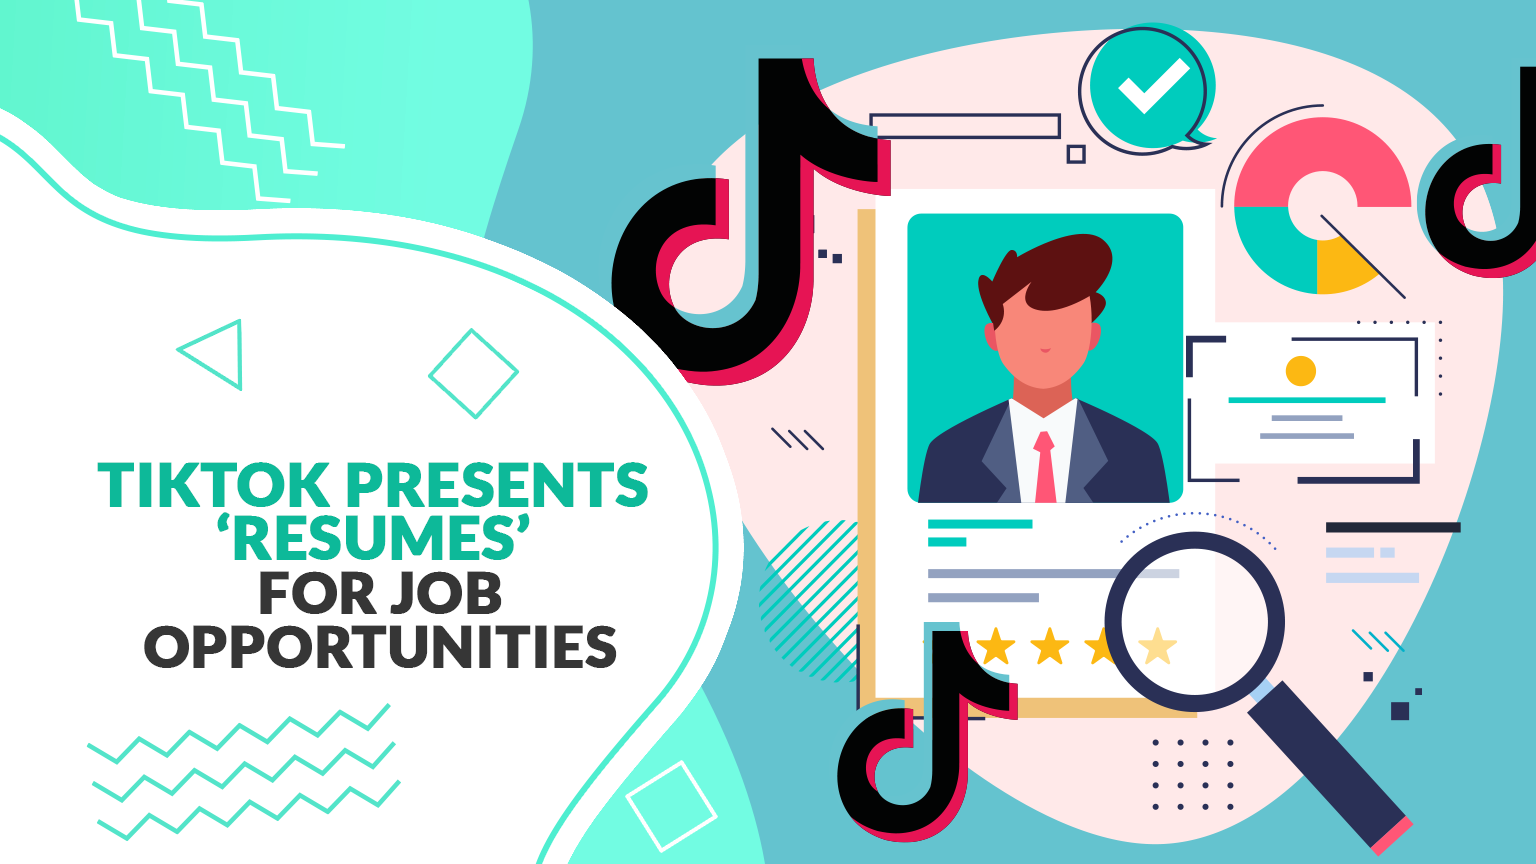 TikTok presents ‘Resumes’ for Job Opportunities (by Publer)